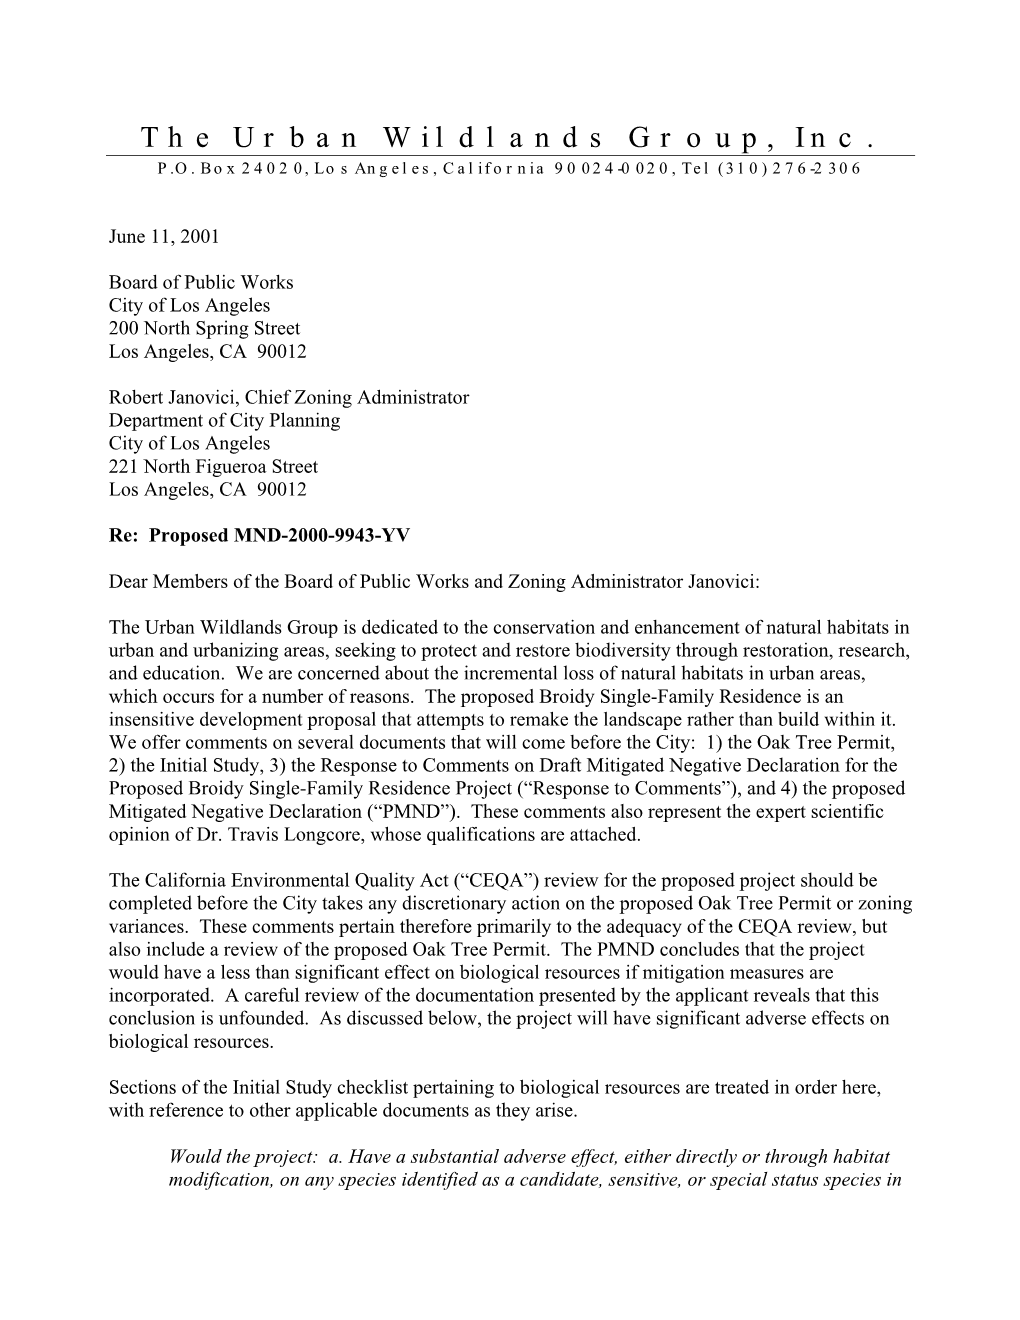 Comment Letter on Proposed Development, Bel Air, California